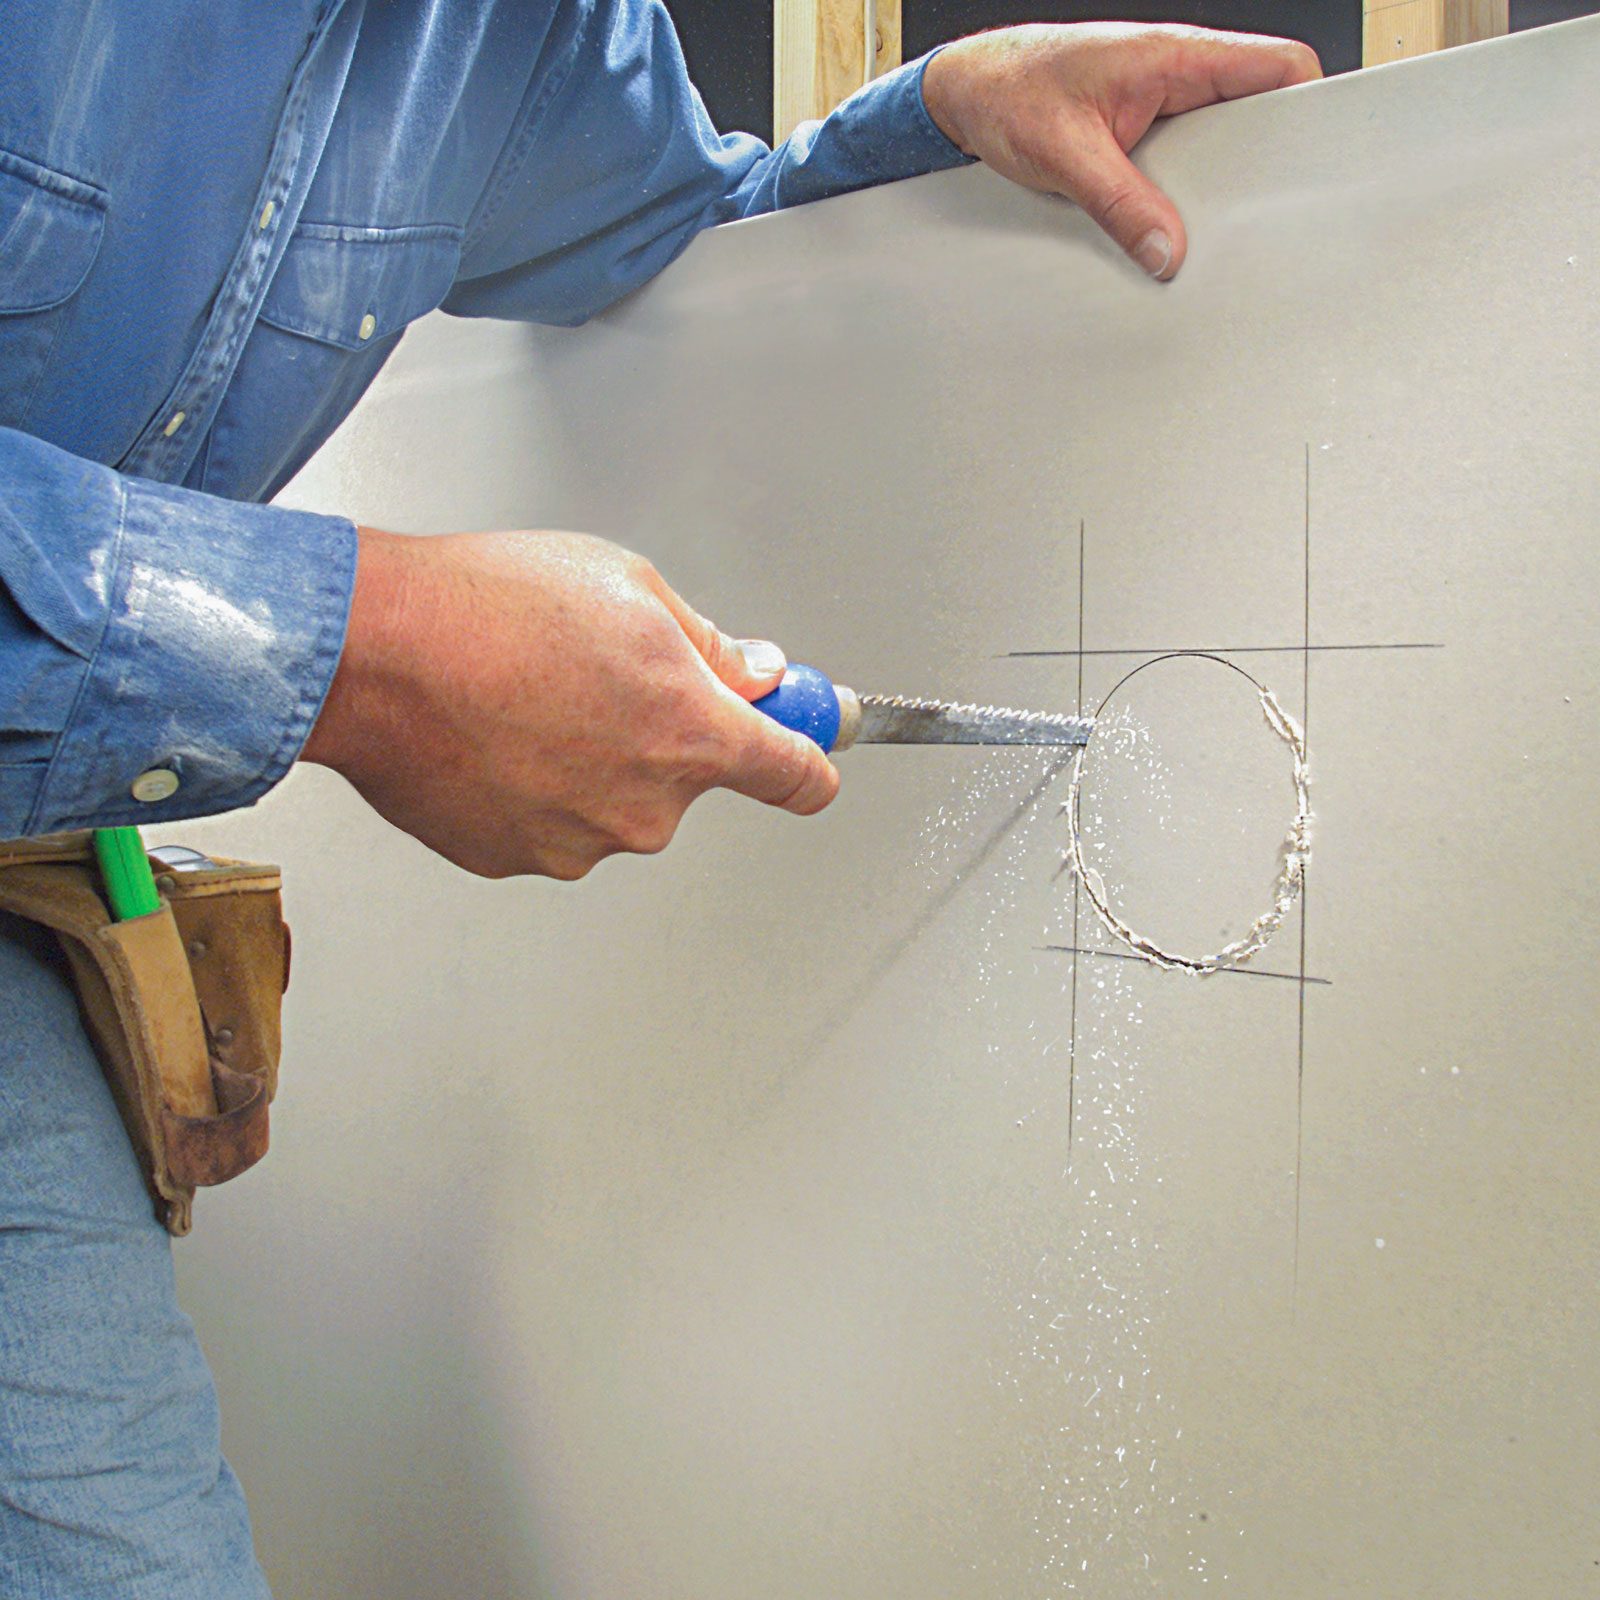 How To Cut a Perfectly-Sized Hole in Drywall for Lights and Electrical Boxes